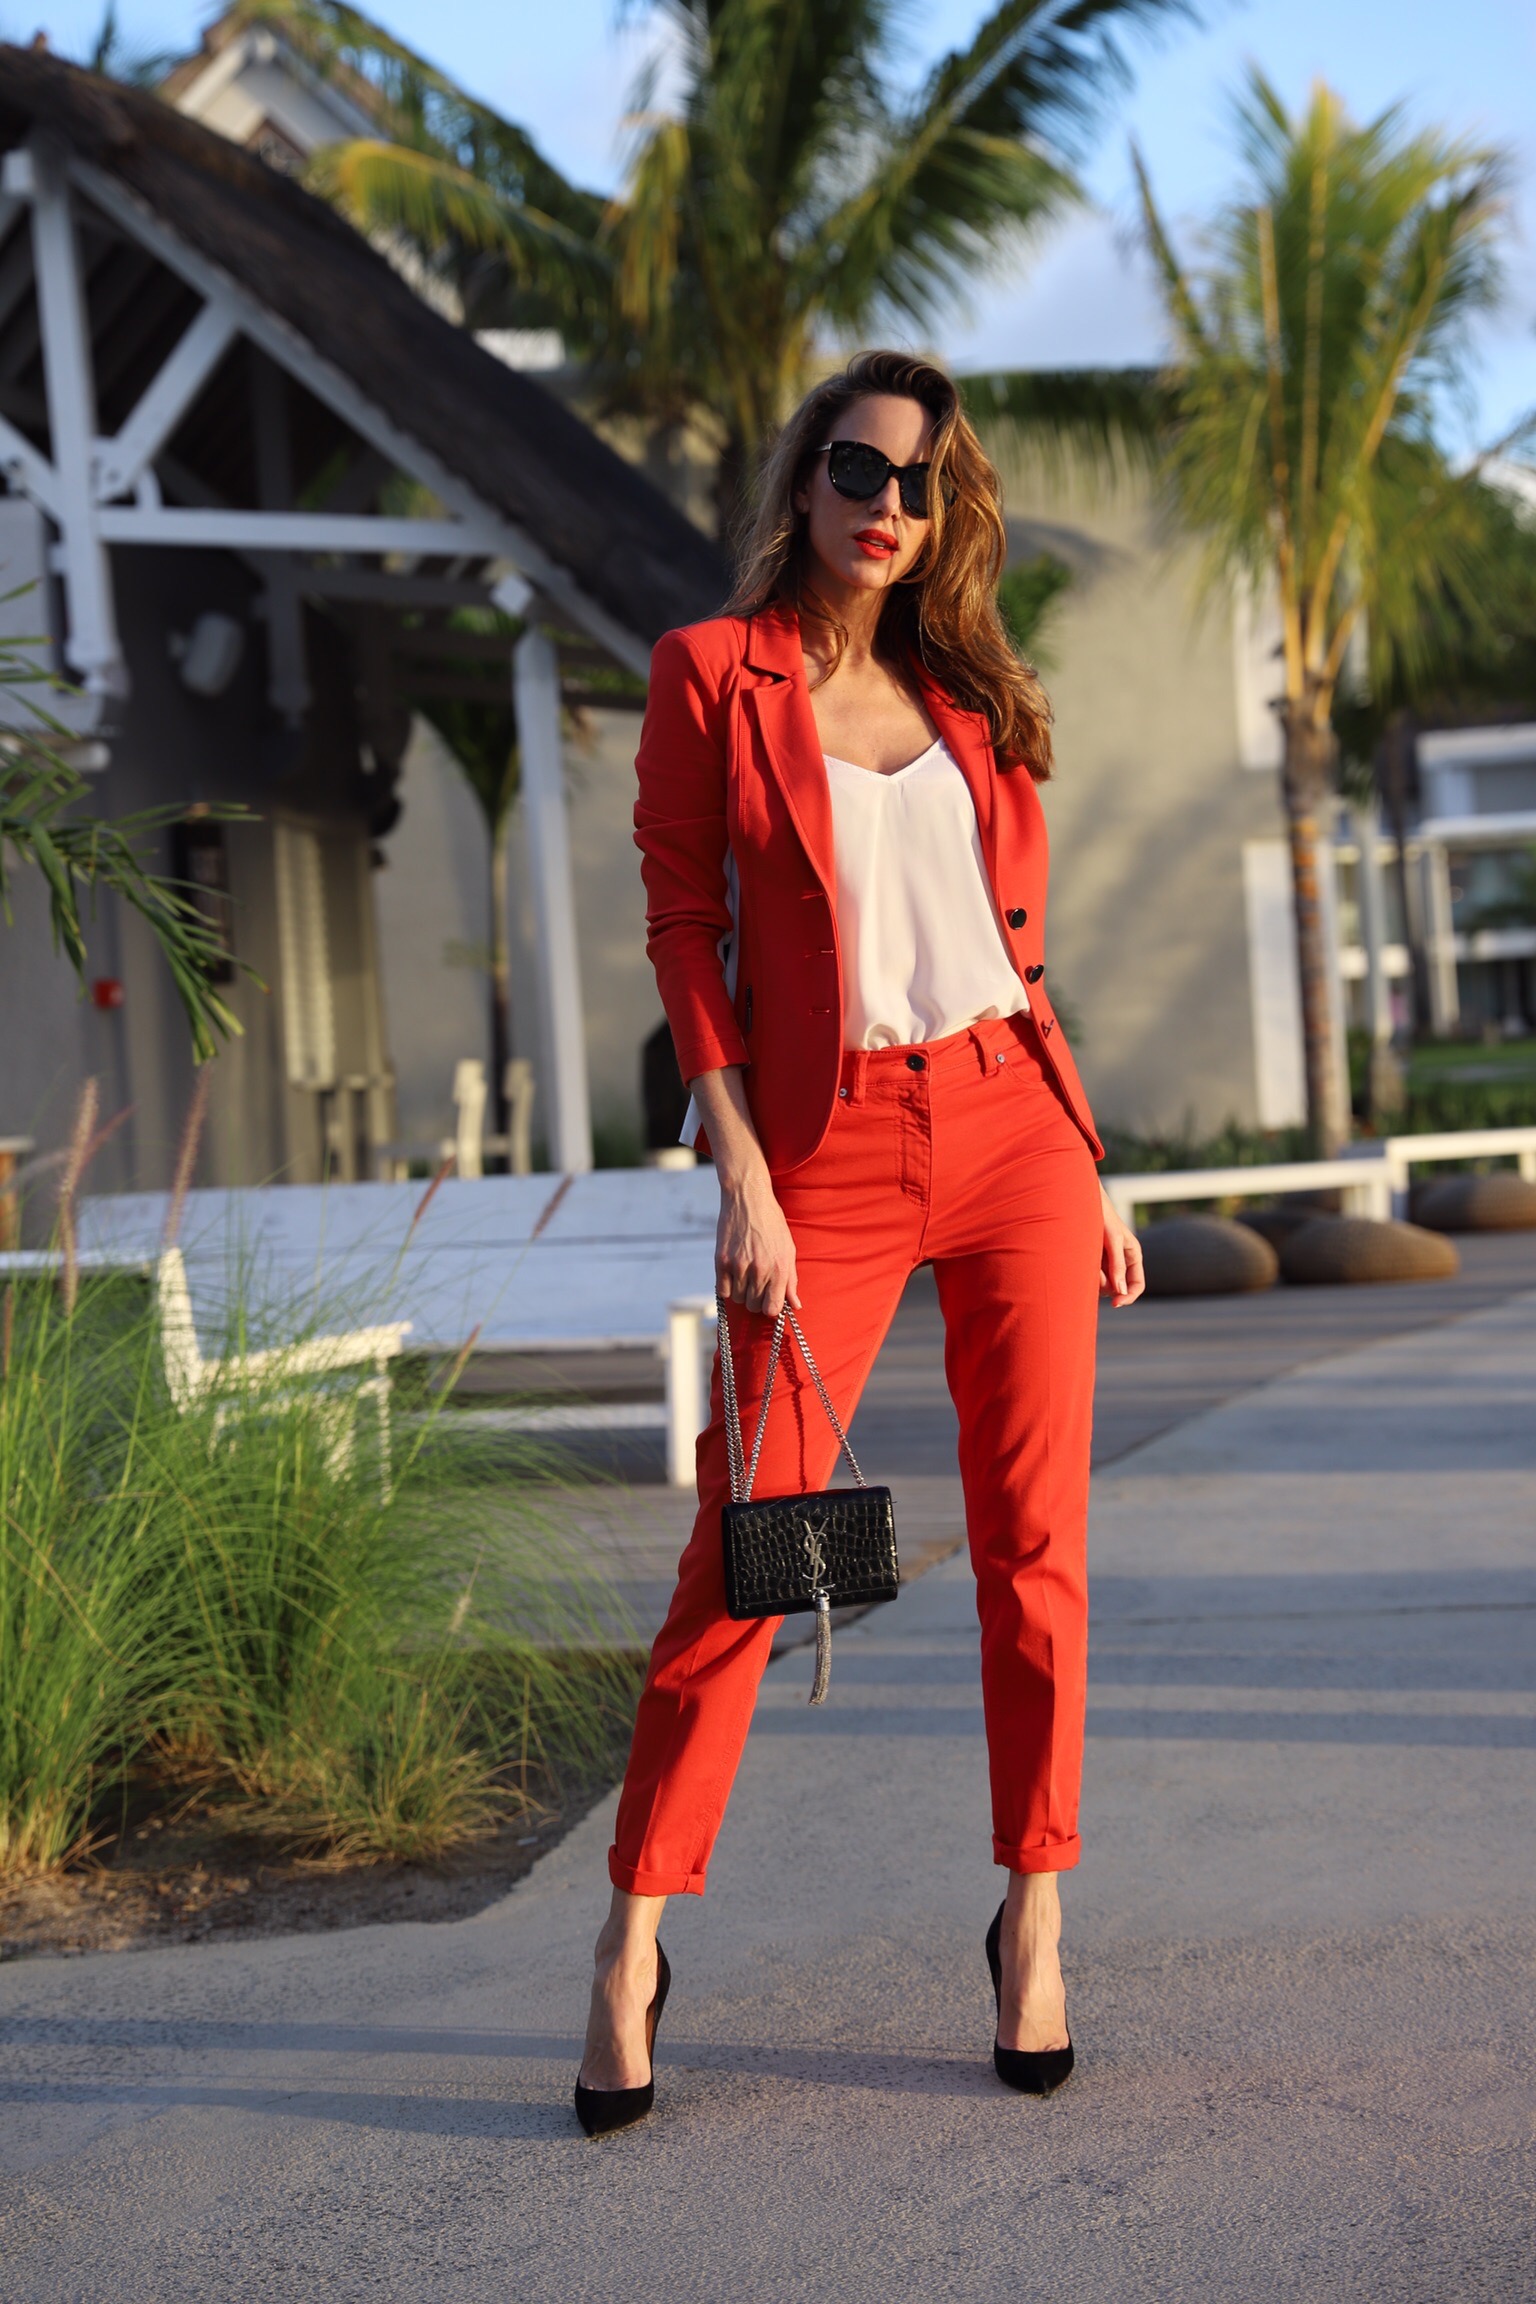 Model & Blogger Alexandra Lapp in Red Vibes wearing a red suit from Air...